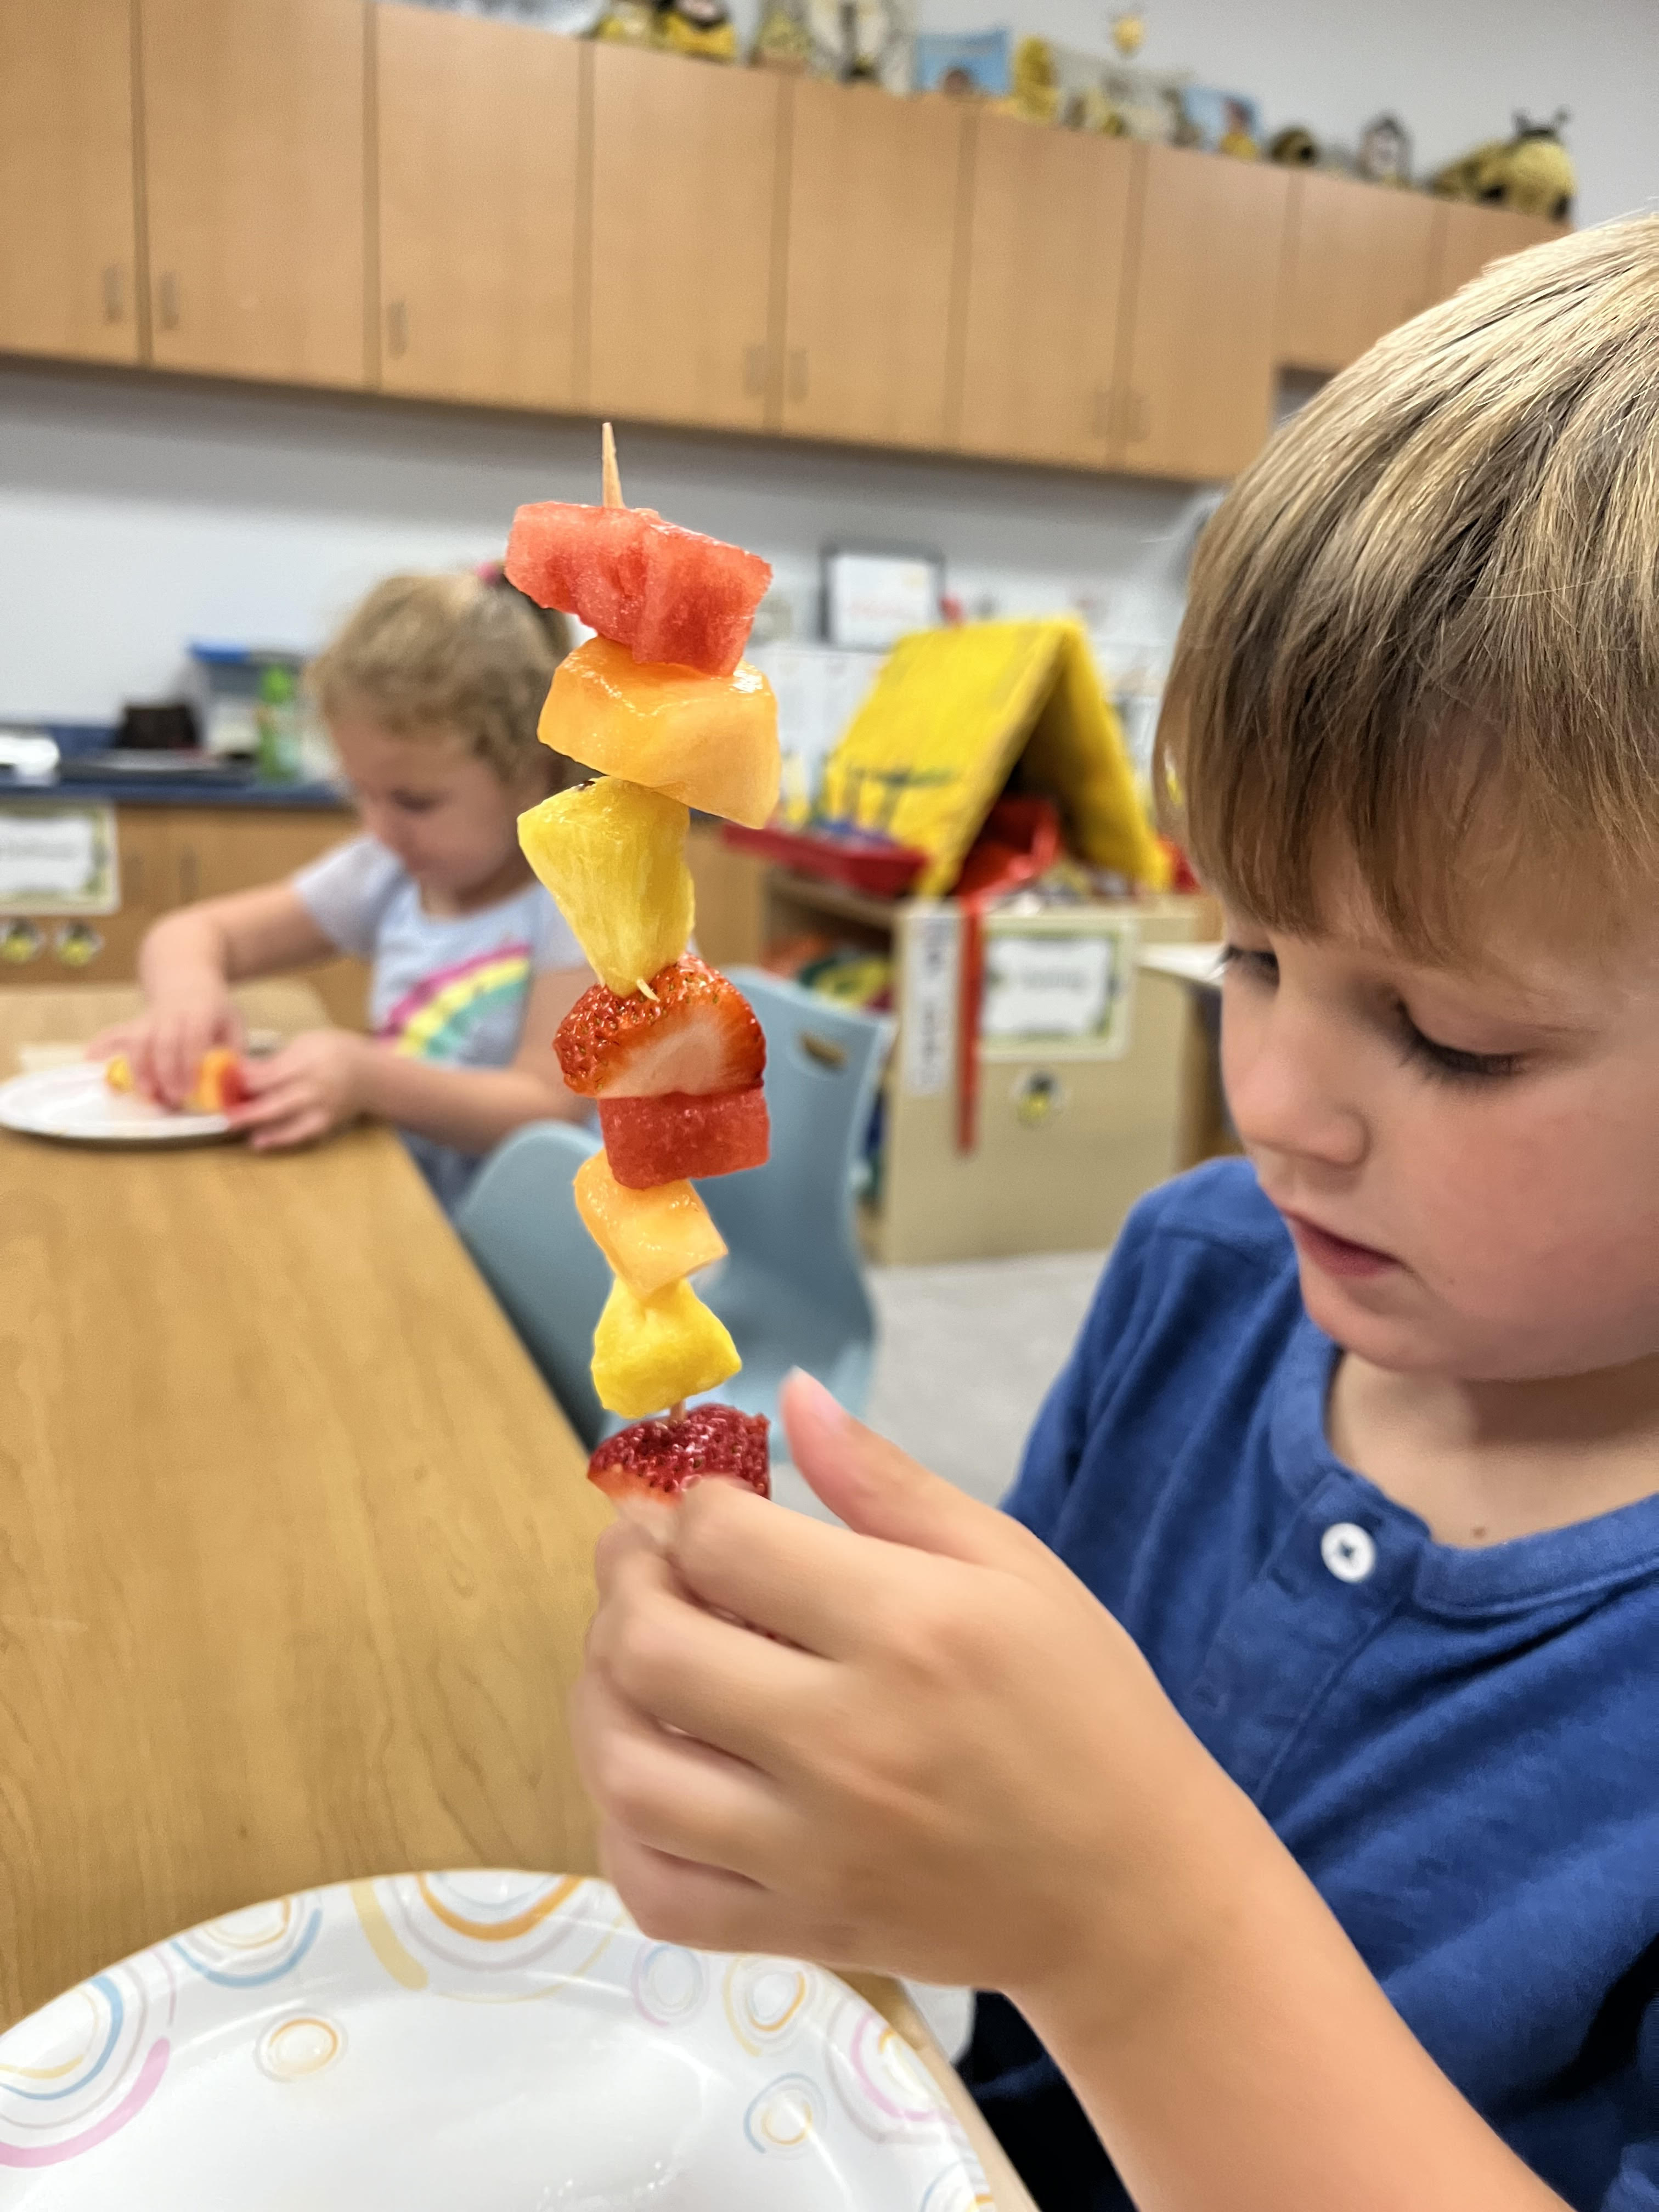 A child adds fruit to a skewer.